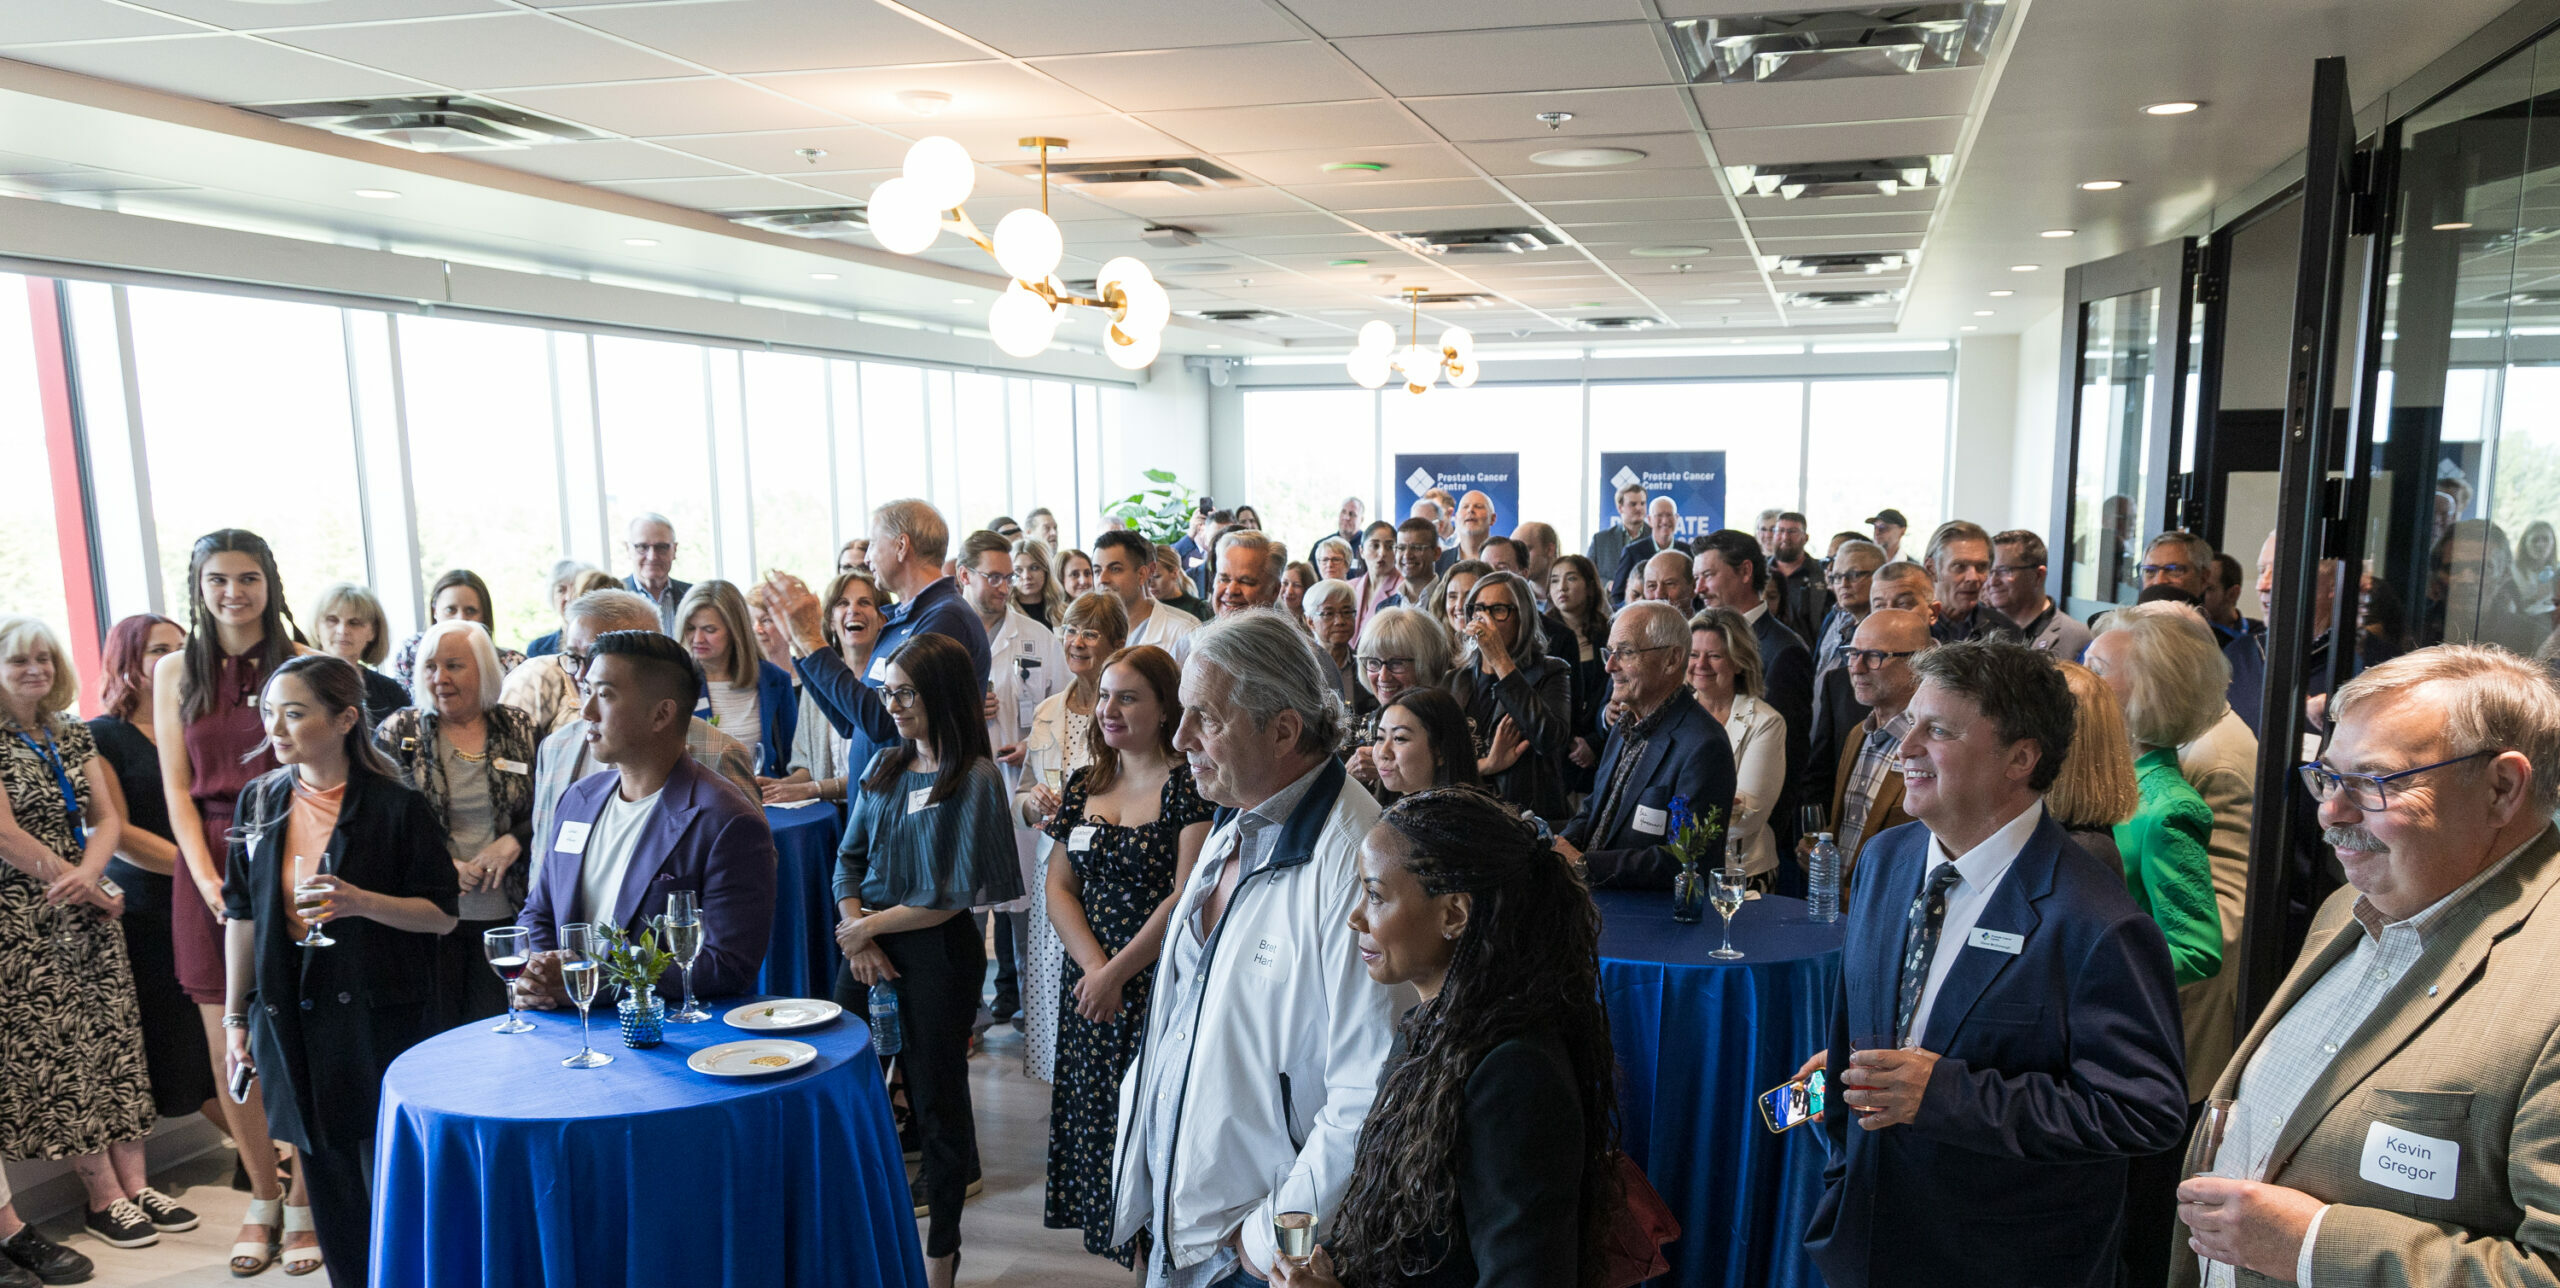 Prostate Cancer Centre Grand Opening Celebration: A Triumph of Community and Innovation